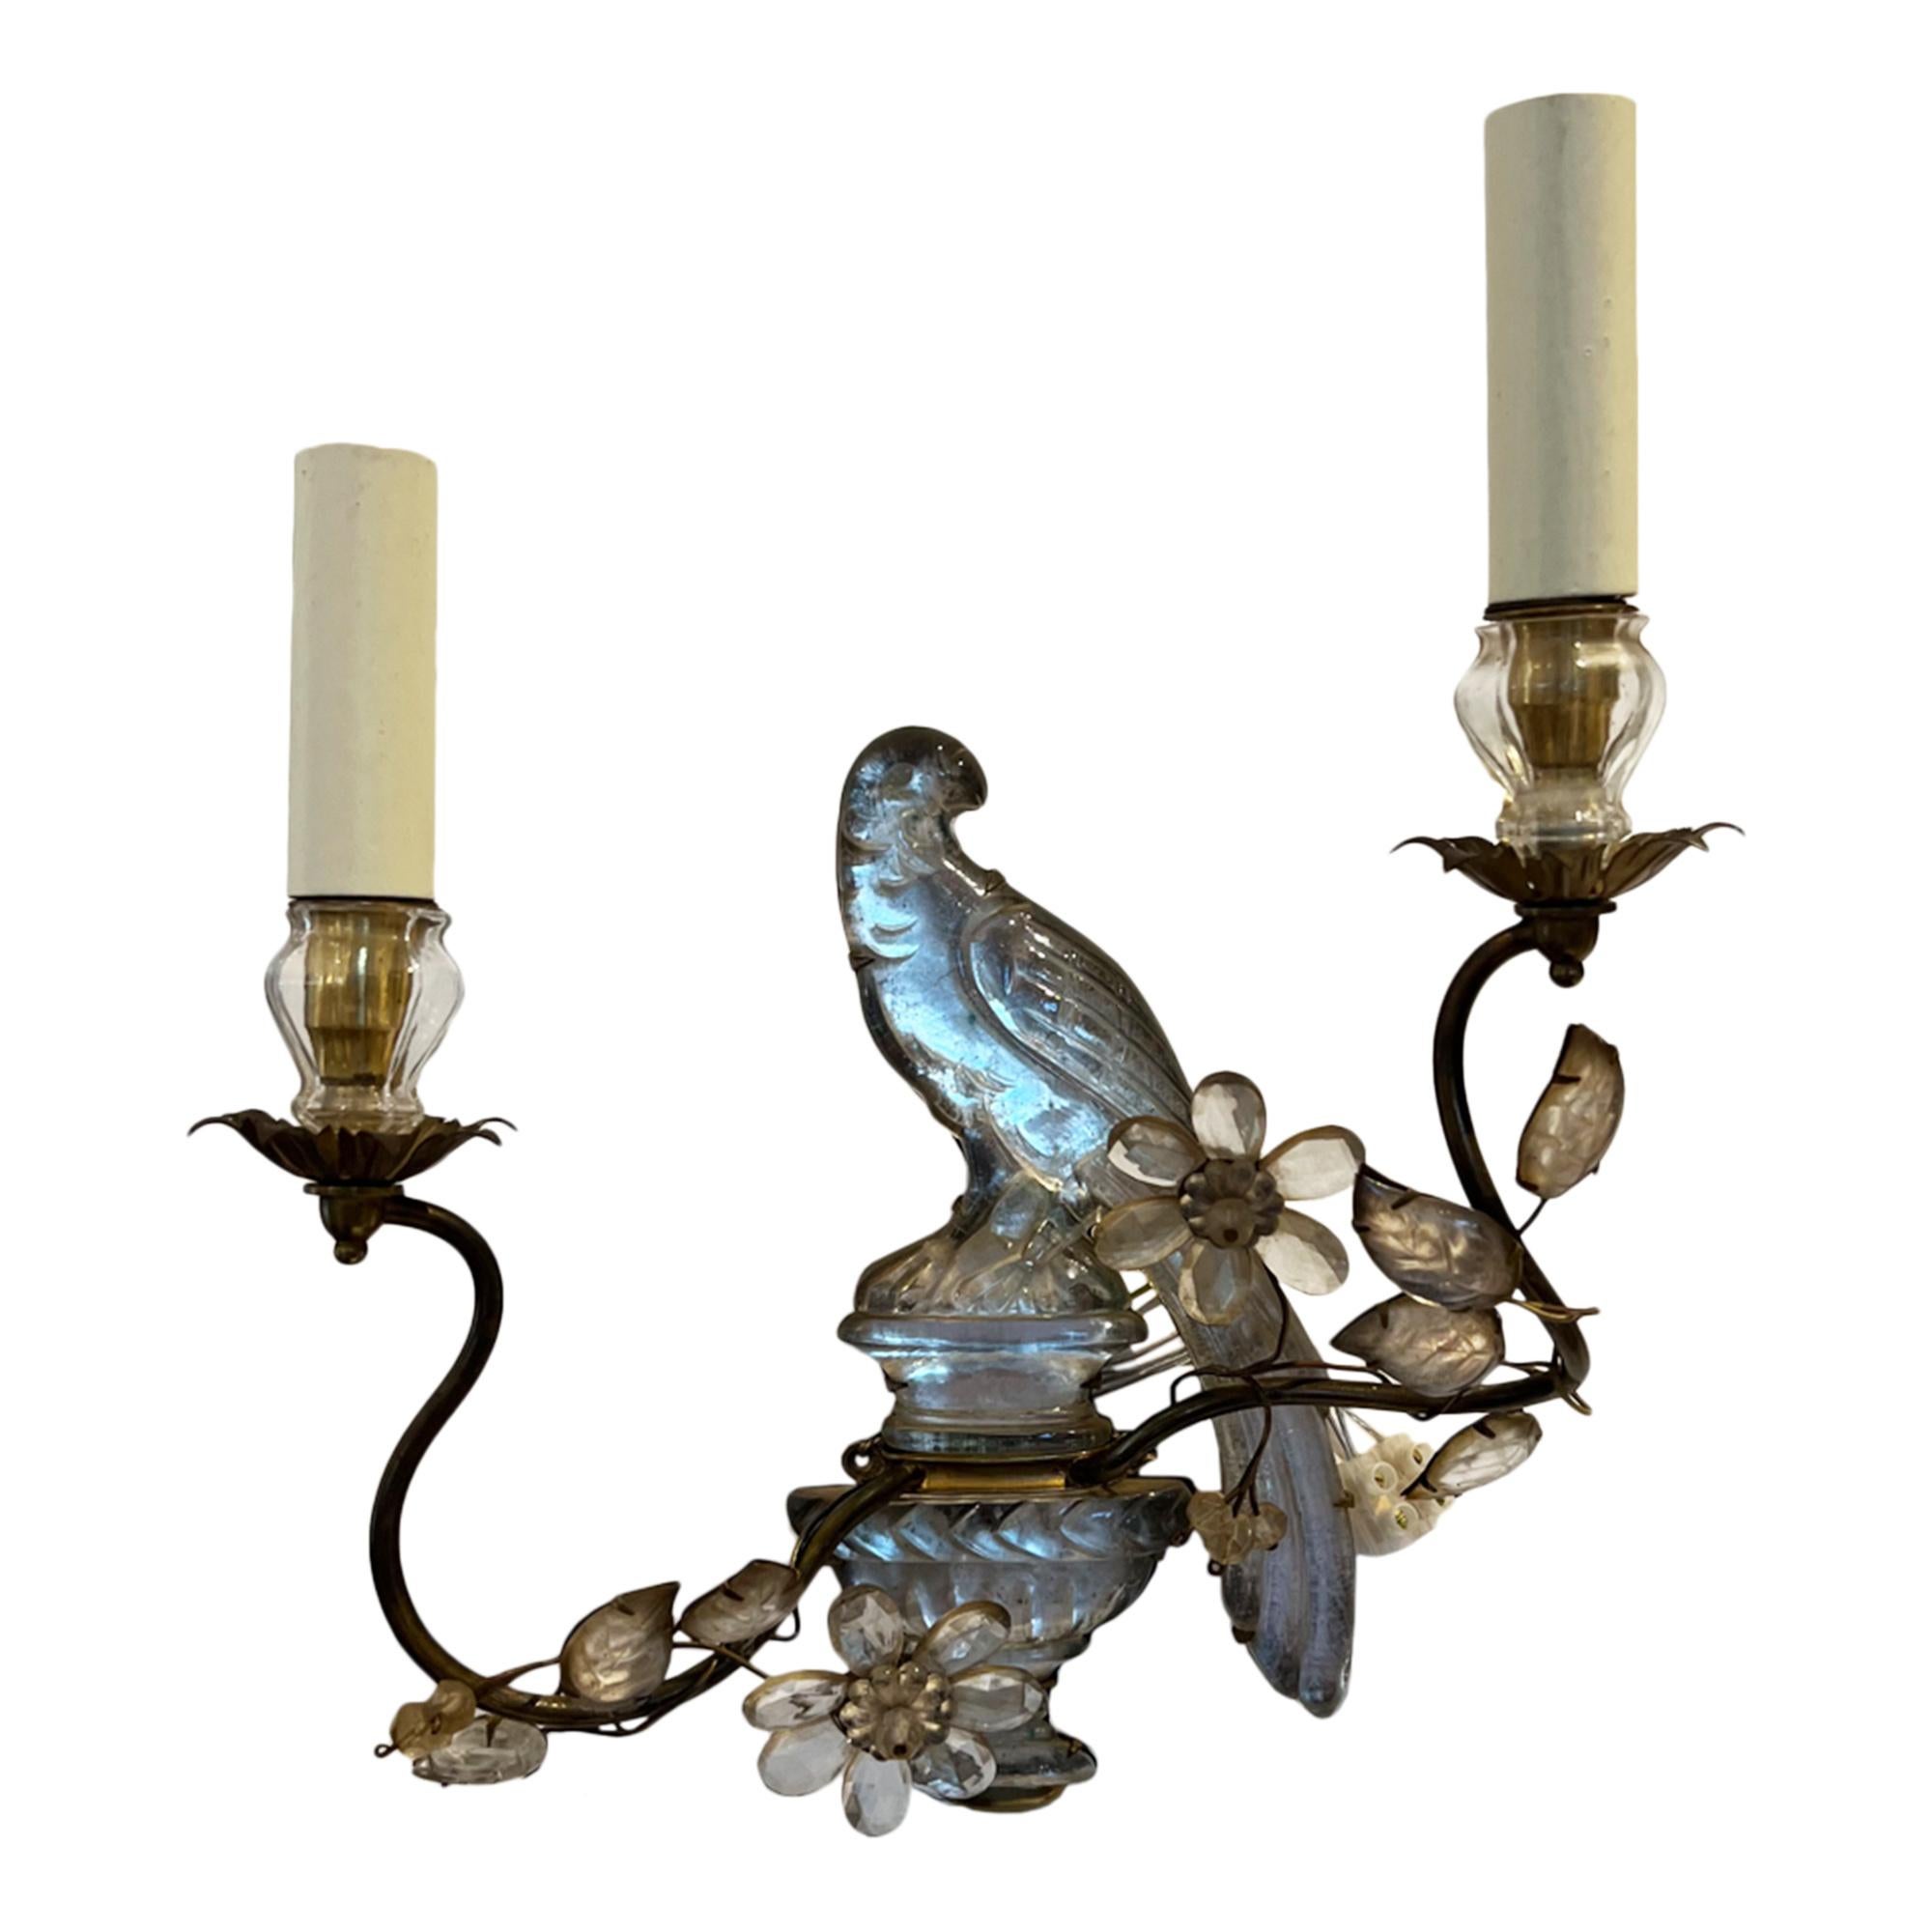 Hand-Crafted Pair of Maison Baguès Parrot and Urn Wall Sconces For Sale